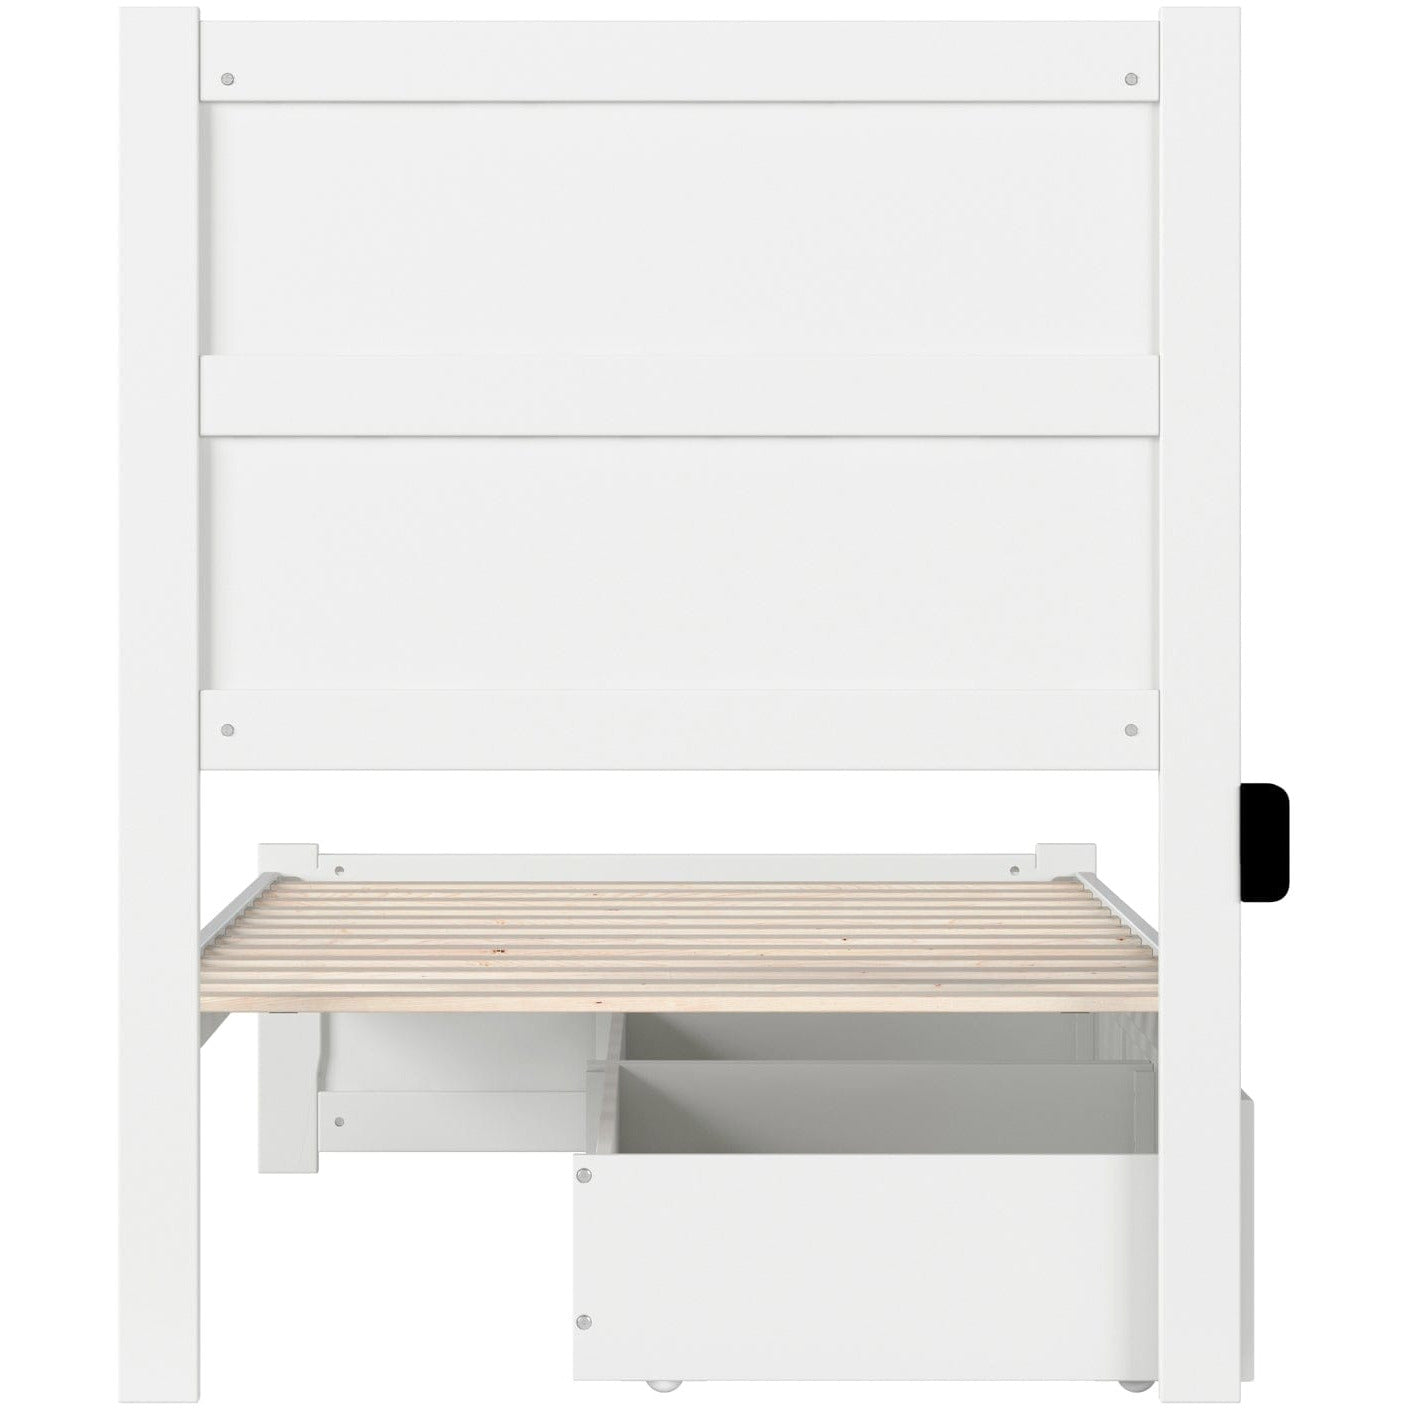 AFI Furnishings NoHo Twin Bed with Footboard and 2 Drawers in White AG9163322